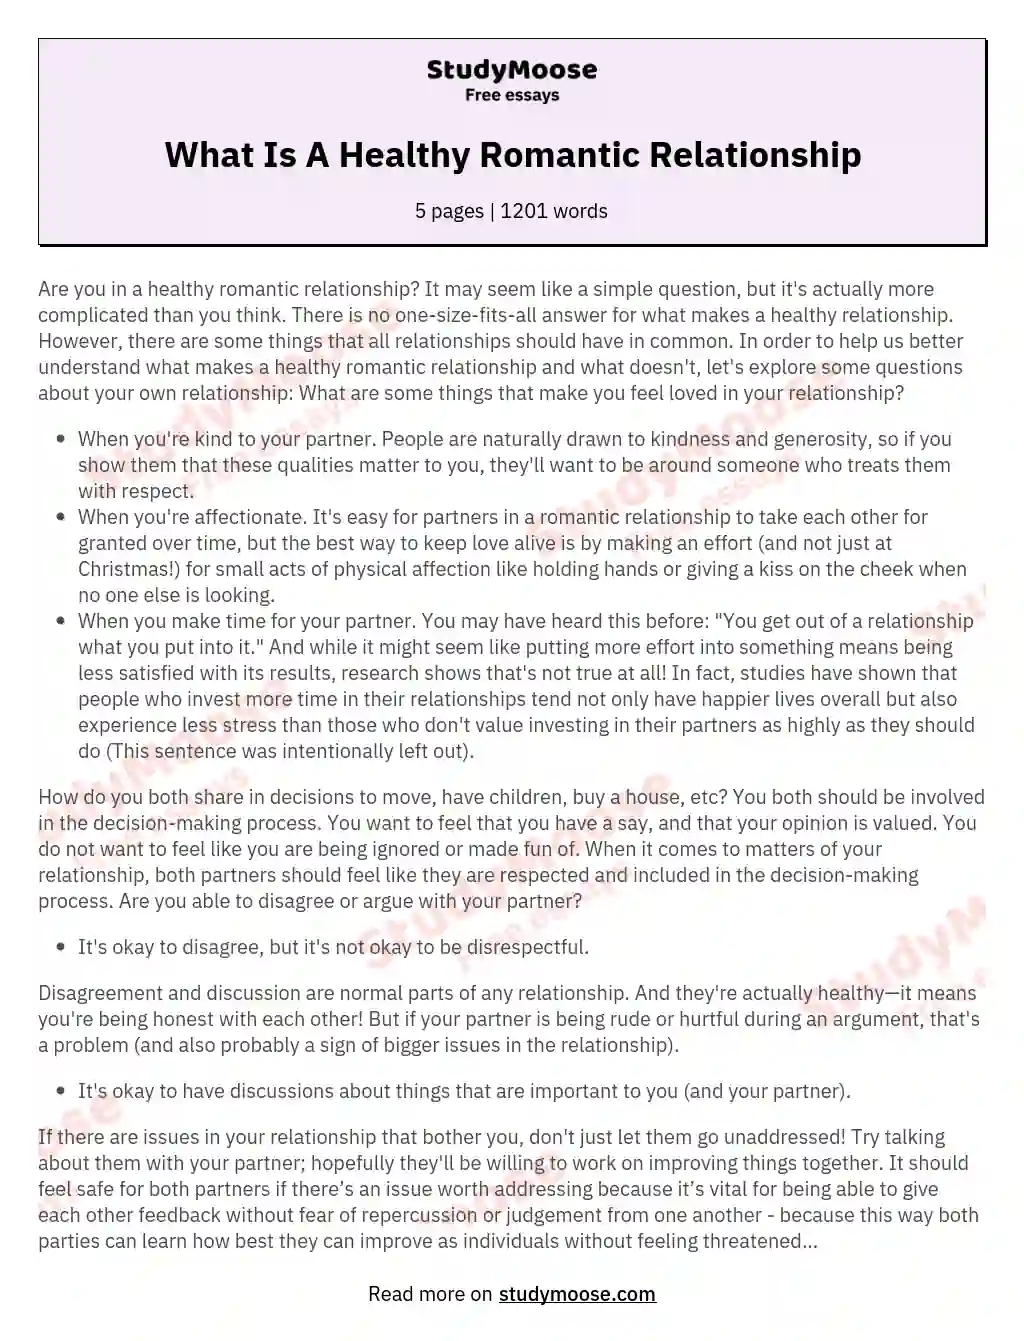 What Is A Healthy Romantic Relationship essay